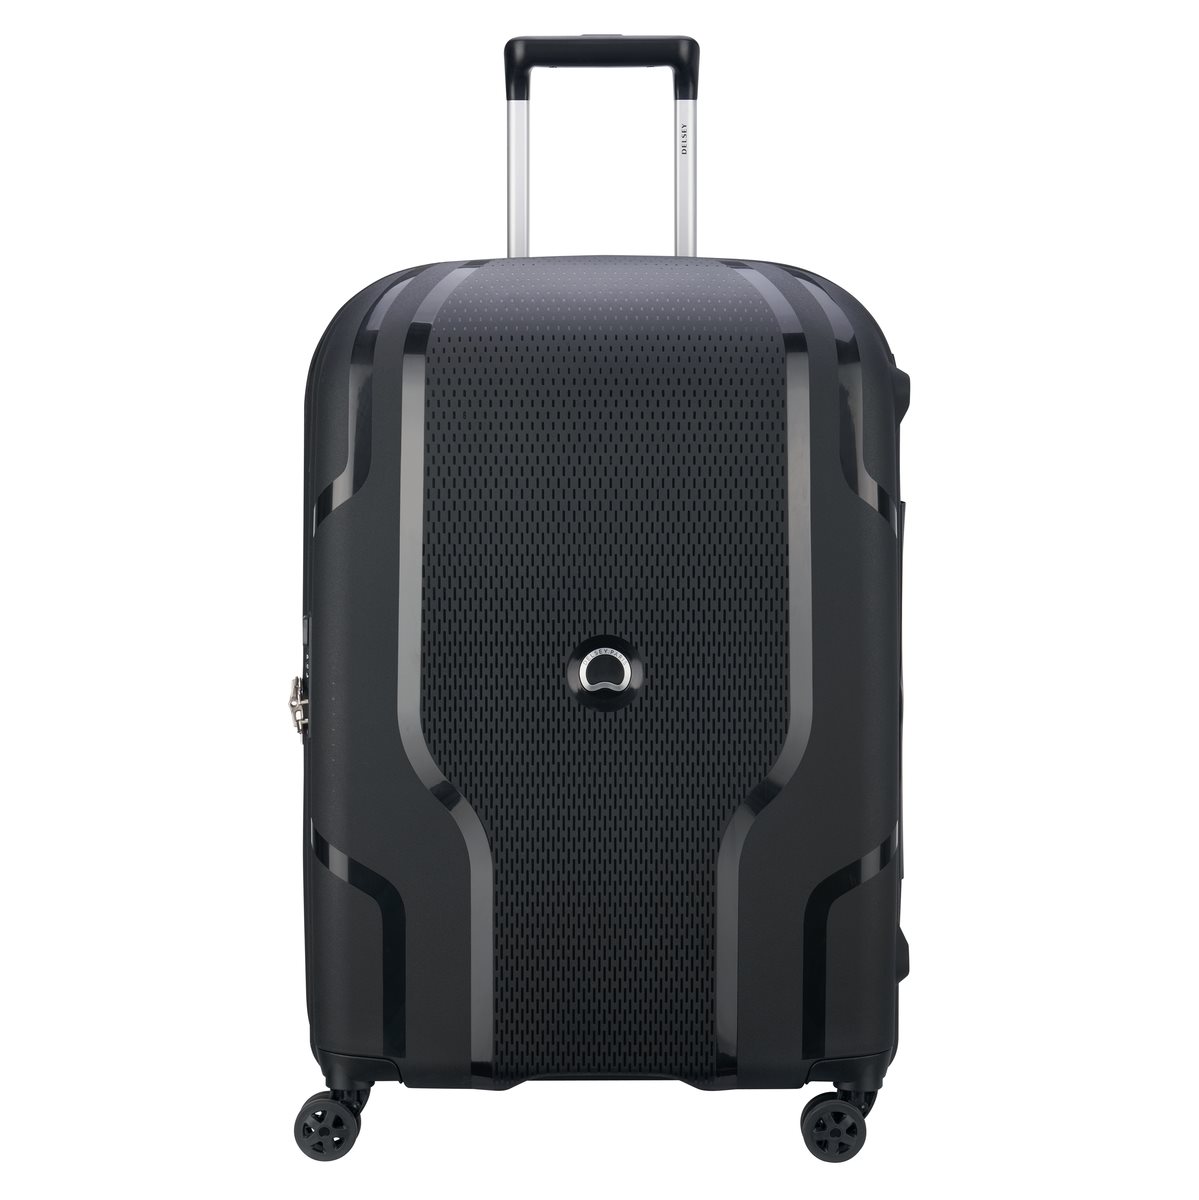 Delsey Βαλίτσα trolley μεσαία expandable 70,5x47x28,5cm σειρά Clavel Black